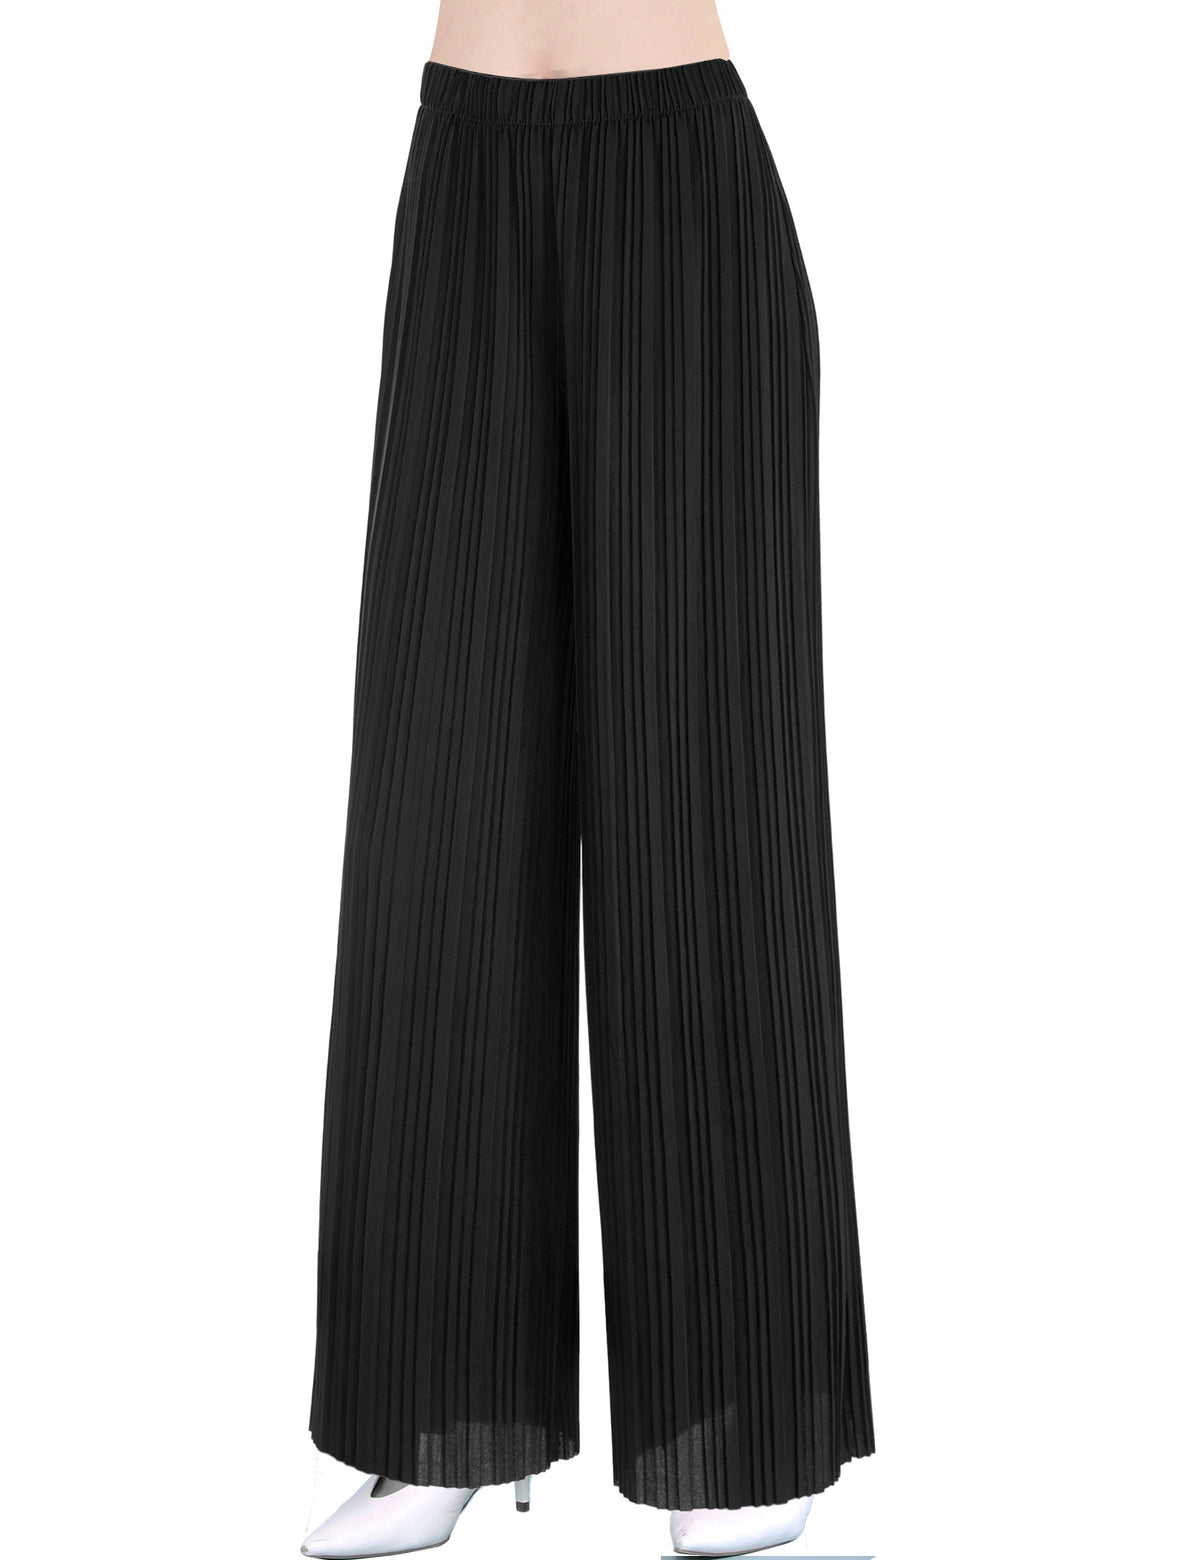 Vintage Style Pleated Wide Leg Pants with Elastic Waist Band-Made in USA